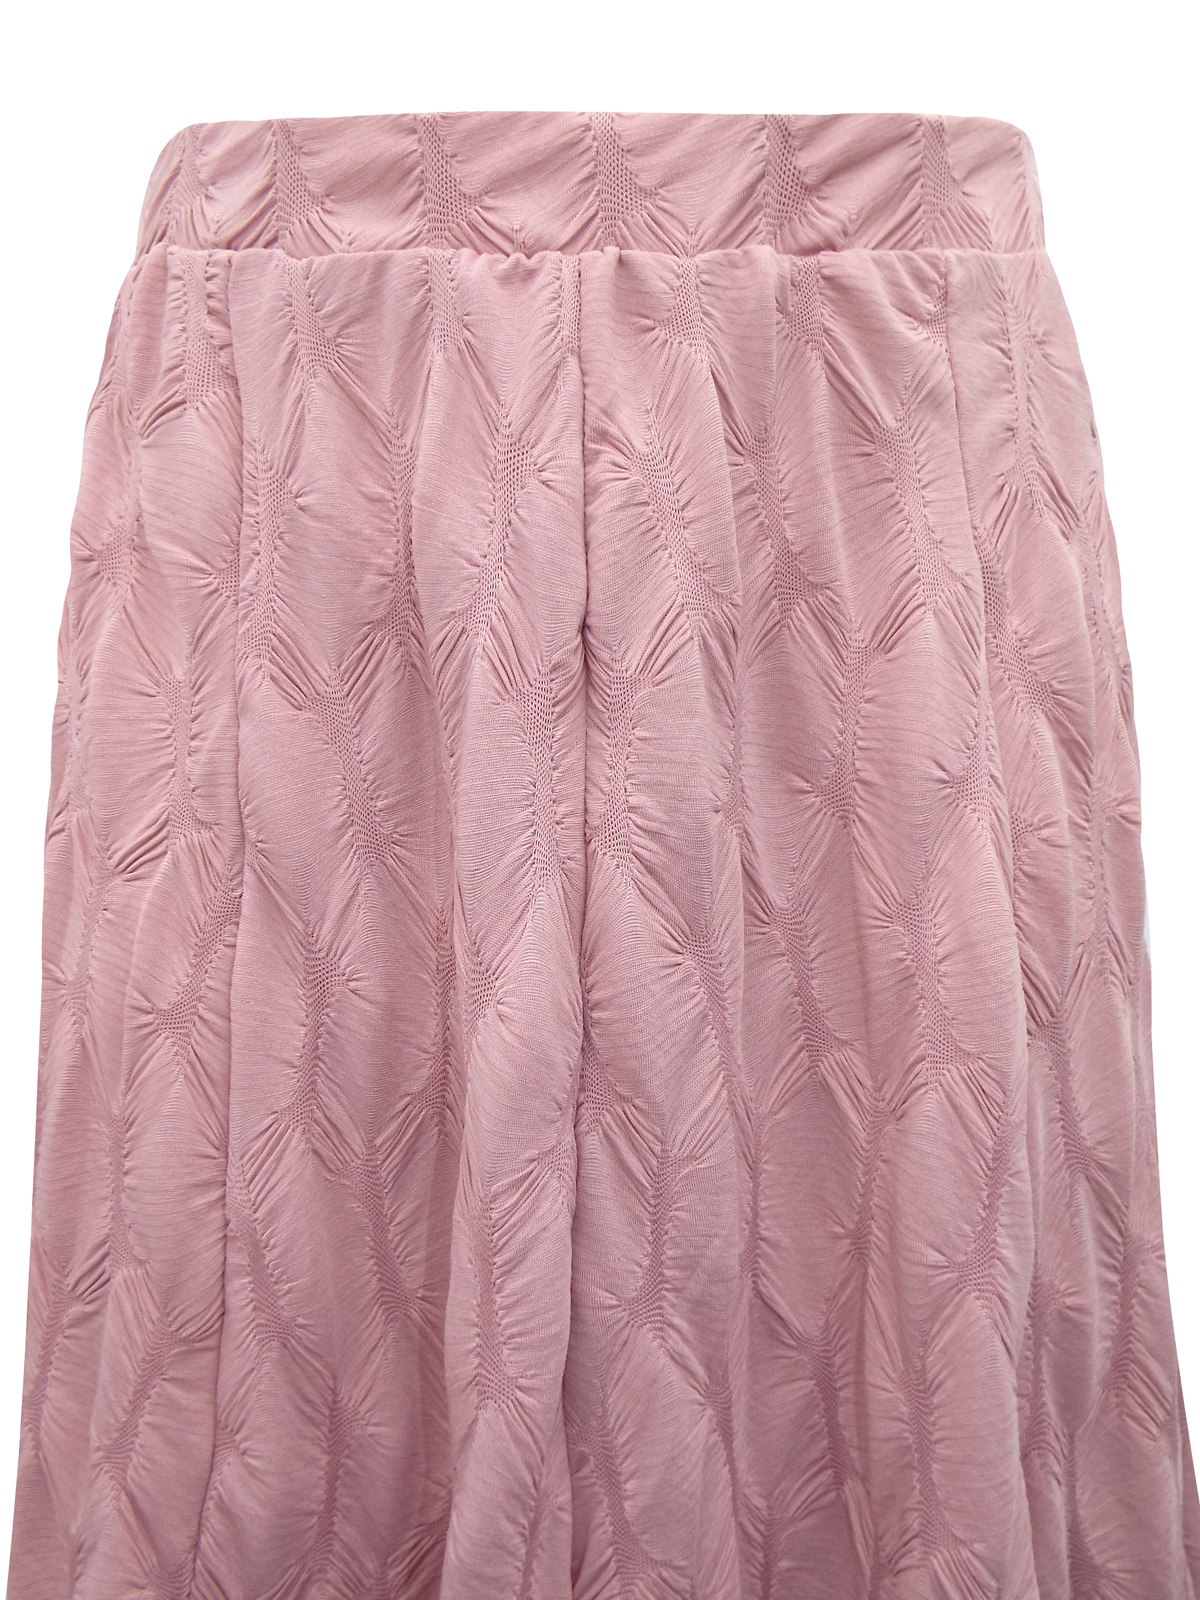 Collection London - - PINK A-Line Ruched Panels Skirt - Plus Size 16 to ...